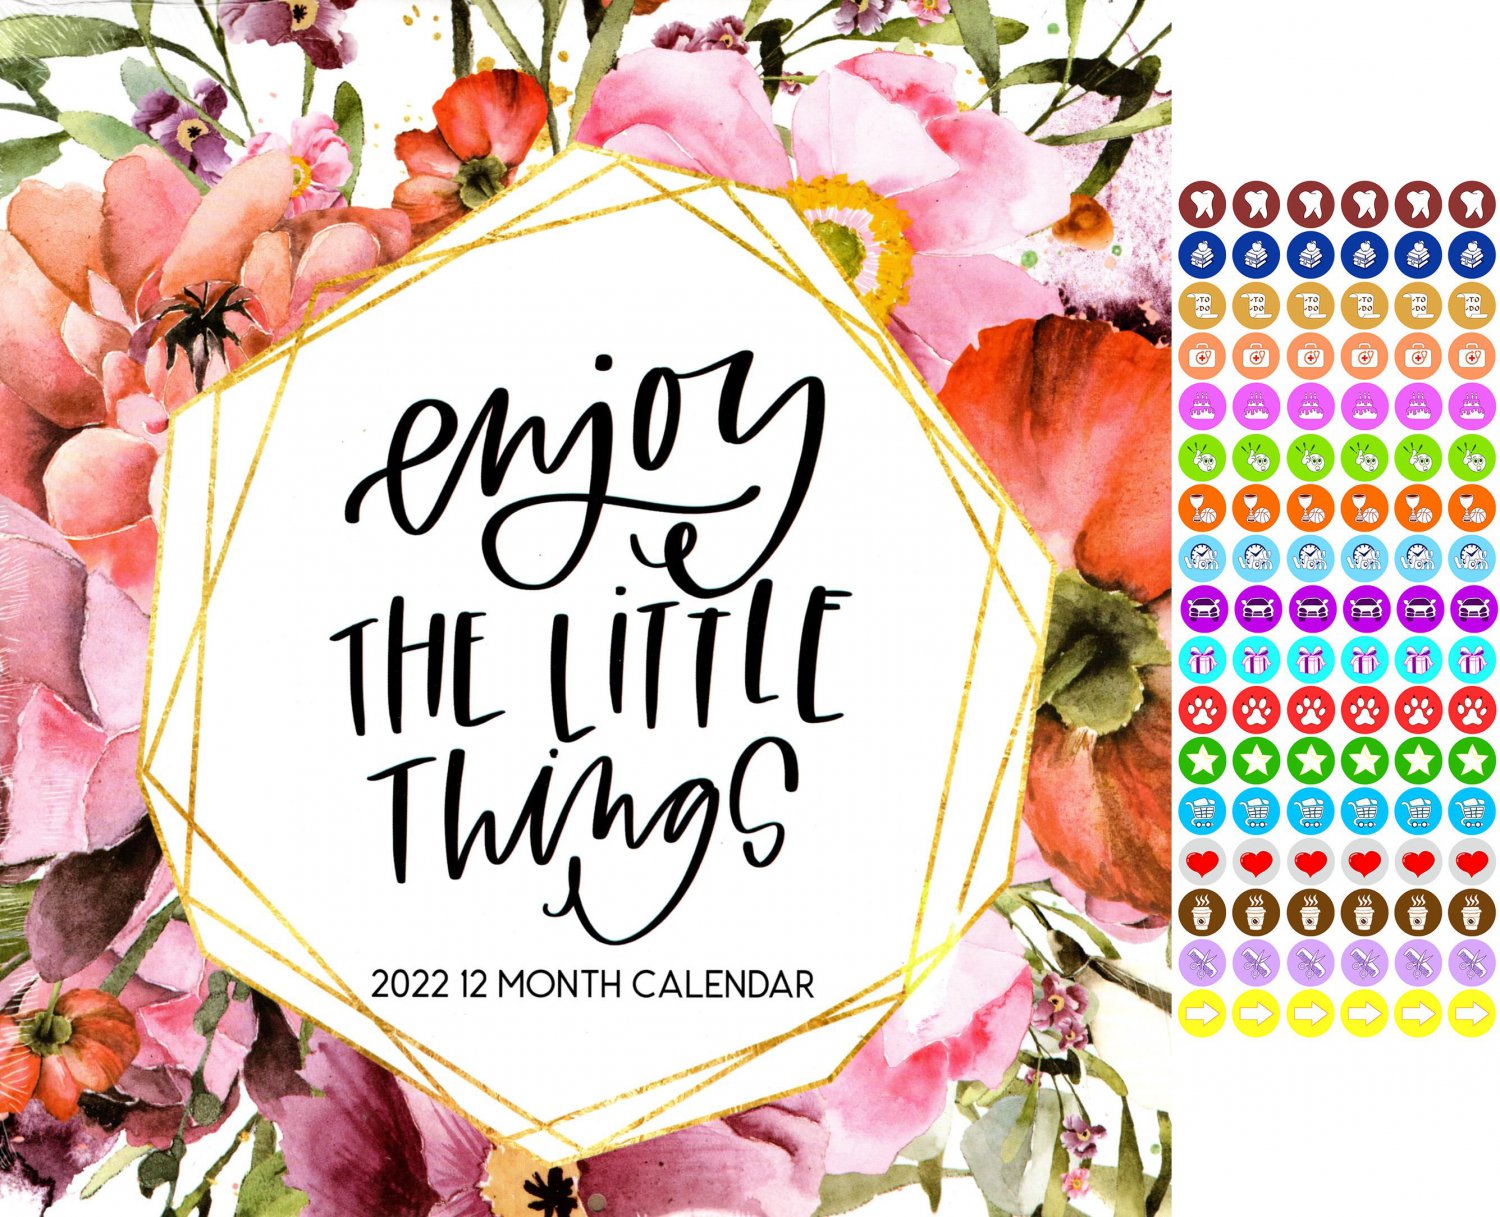 2022 12 Month Wall Calendar - Enjoy the Little Things - with 100 Reminder Stickers